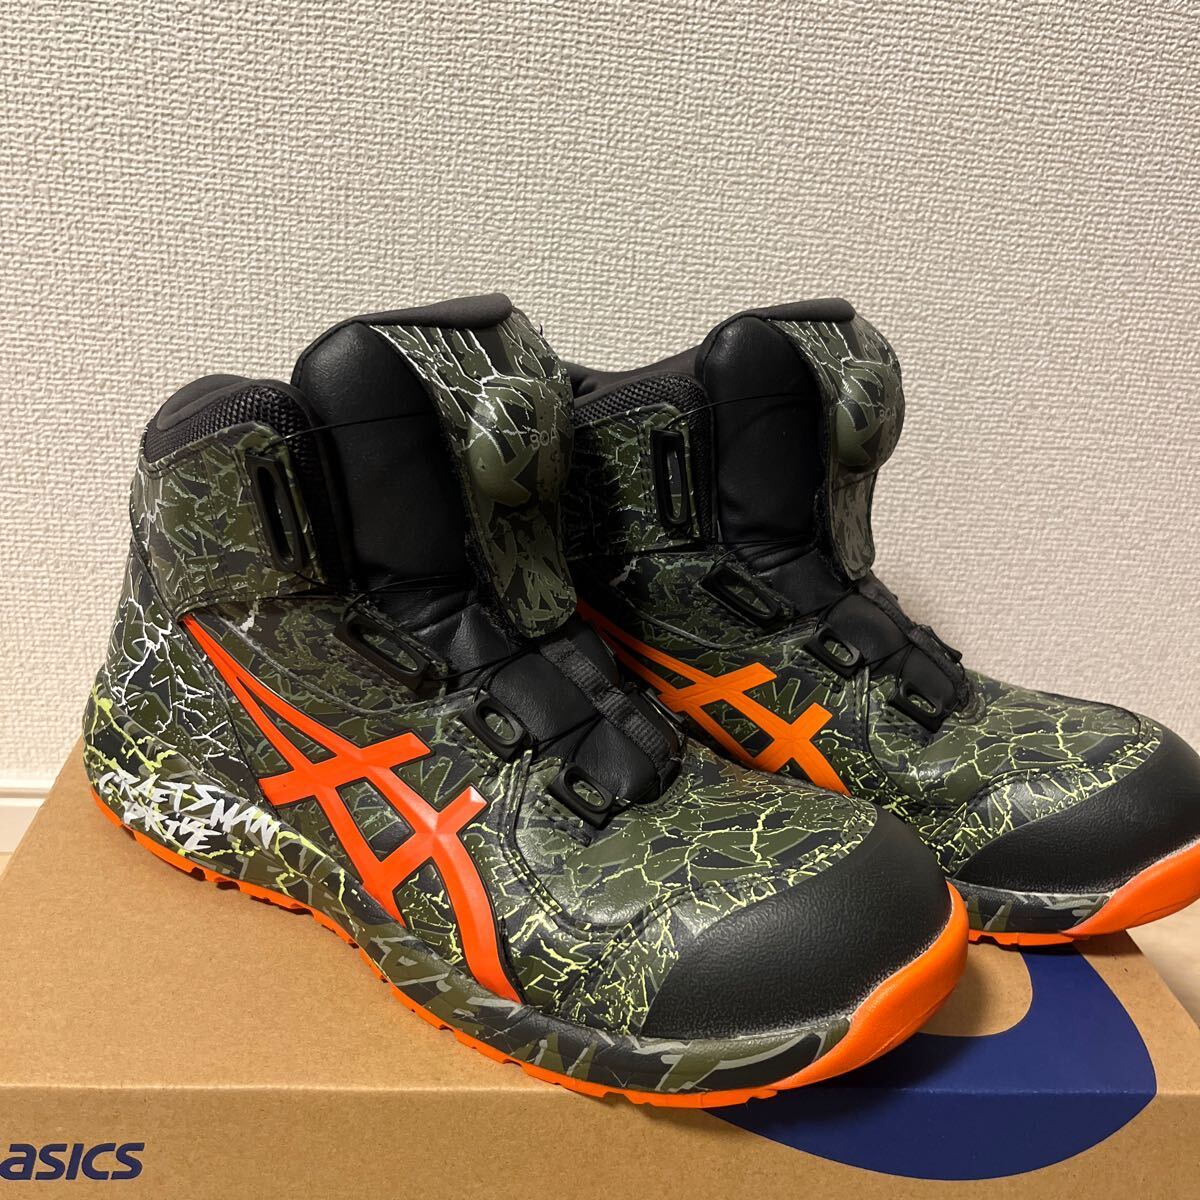 asics limitation color CP304 Boa safety shoes Asics wing job is ikatto dial type safety shoes secondhand goods beautiful goods 26cm